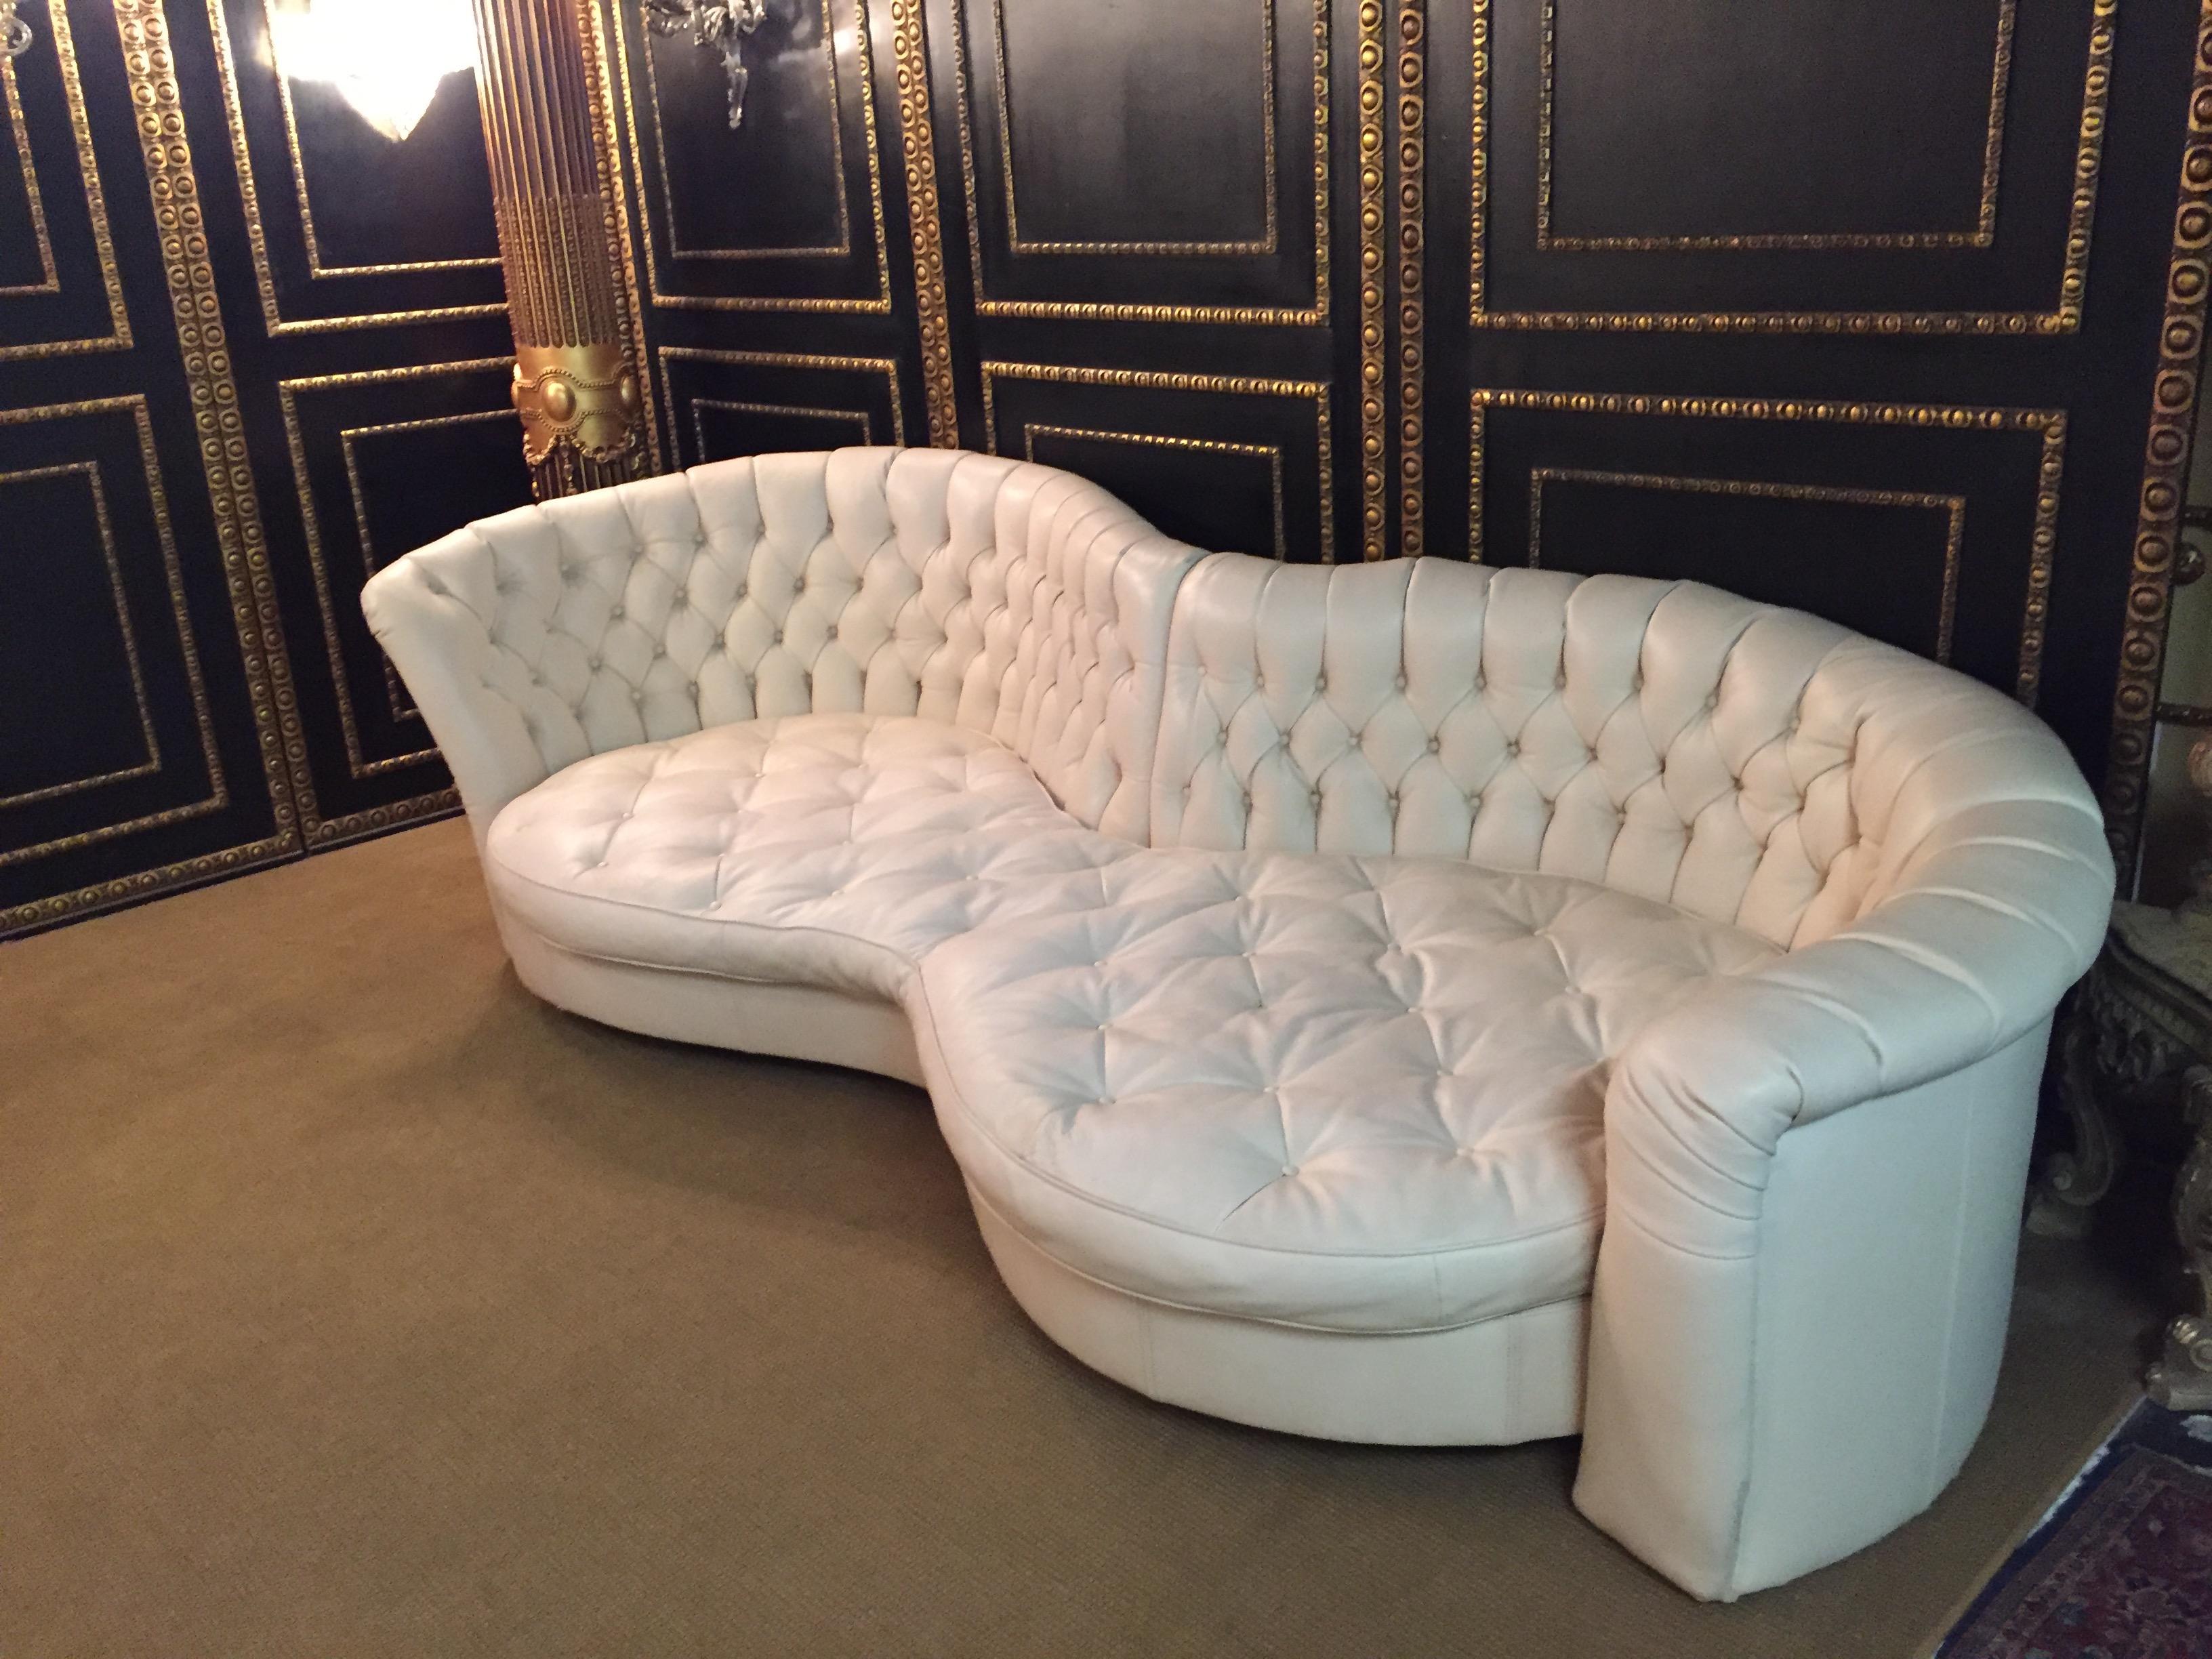 Large designer sofa by the famous  company Bretz made in Germany
Genuine leather with button stitching
Chesterfield style.
With matching table with glass top.